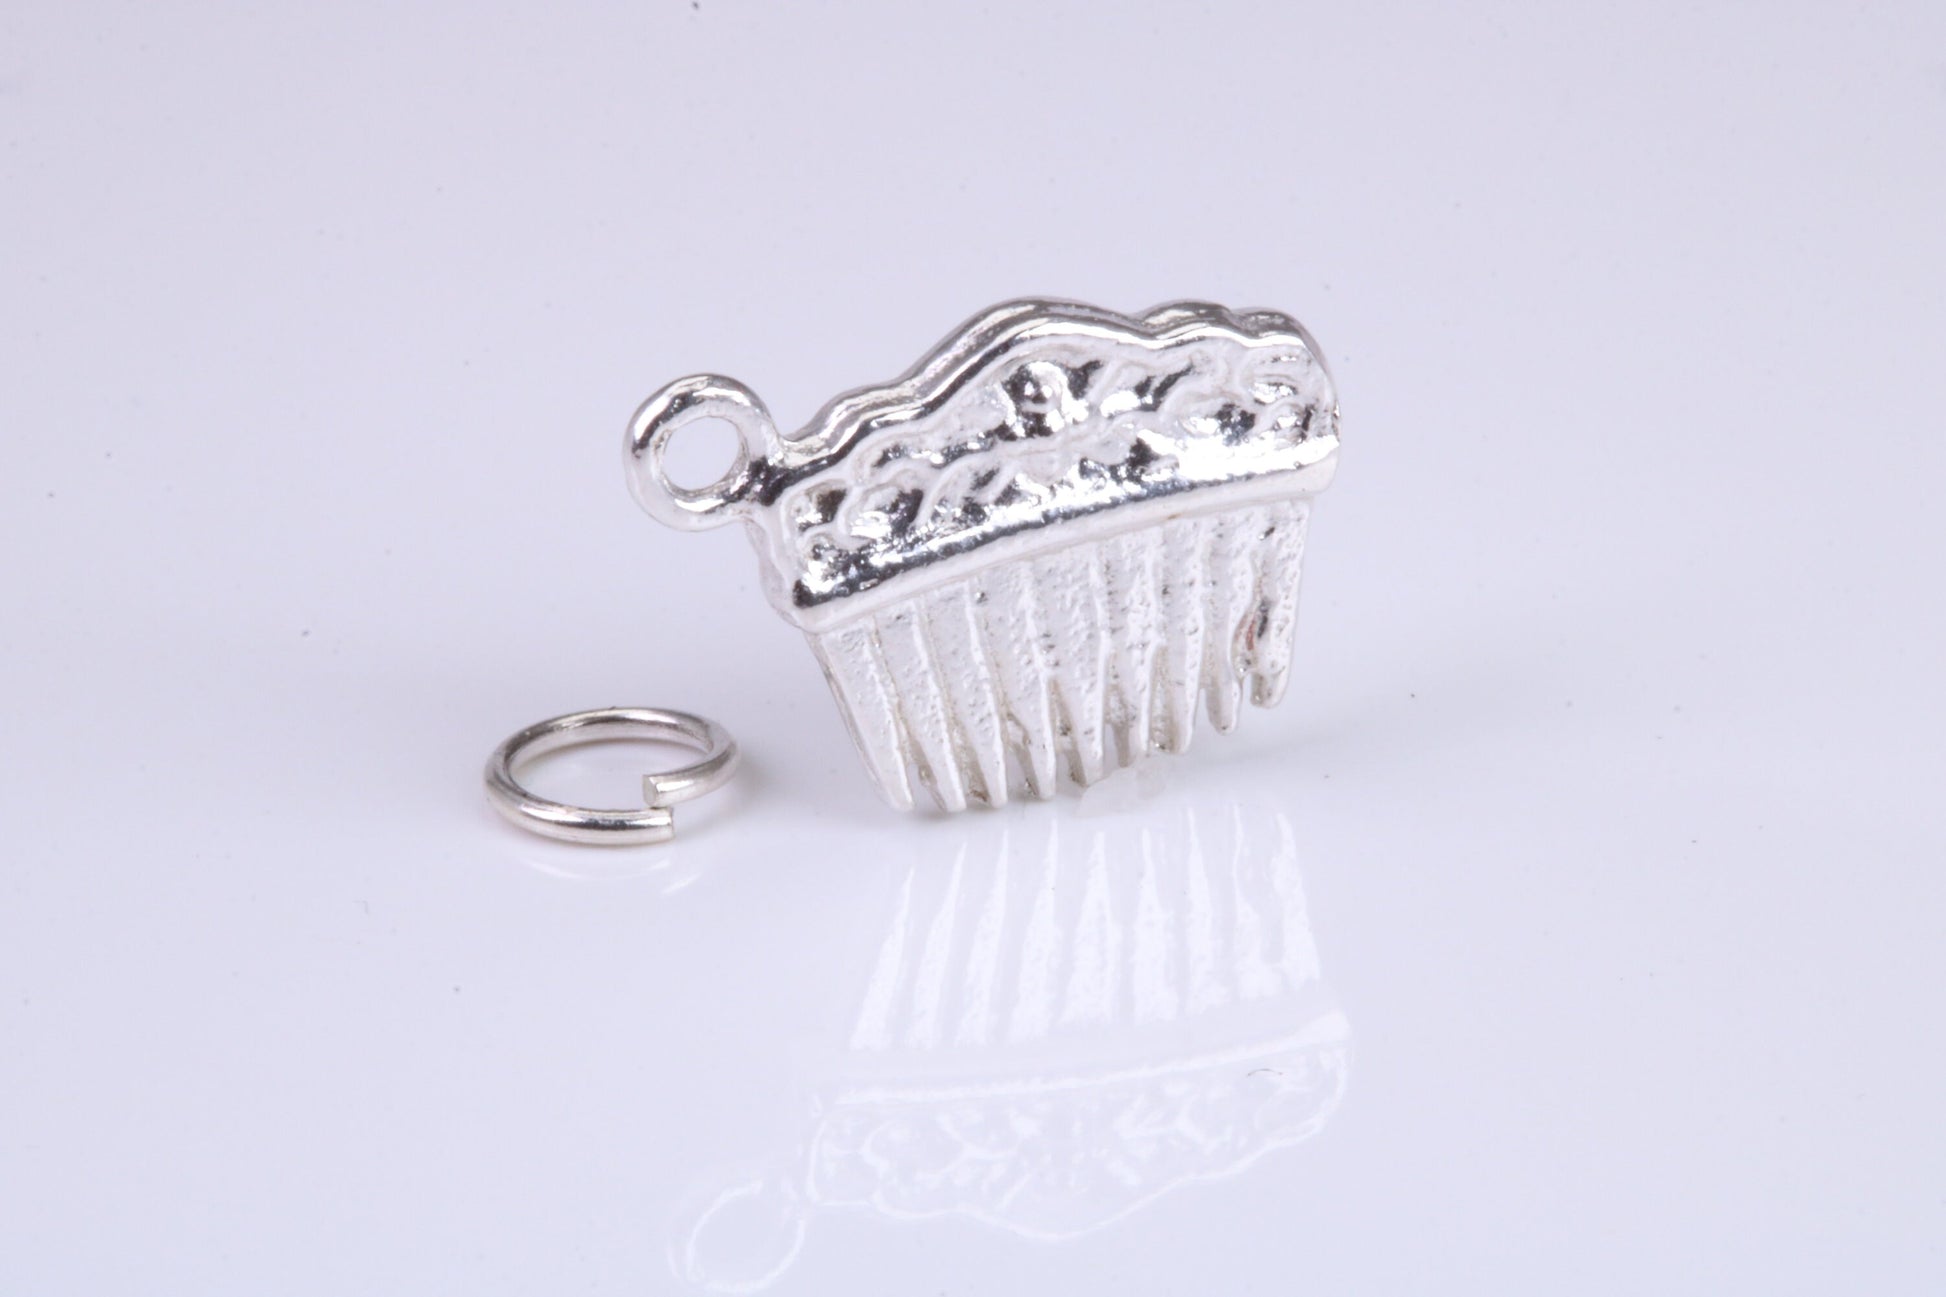 Hair Comb Charm, Traditional Charm, Made from Solid 925 Grade Sterling Silver, Complete with Attachment Link